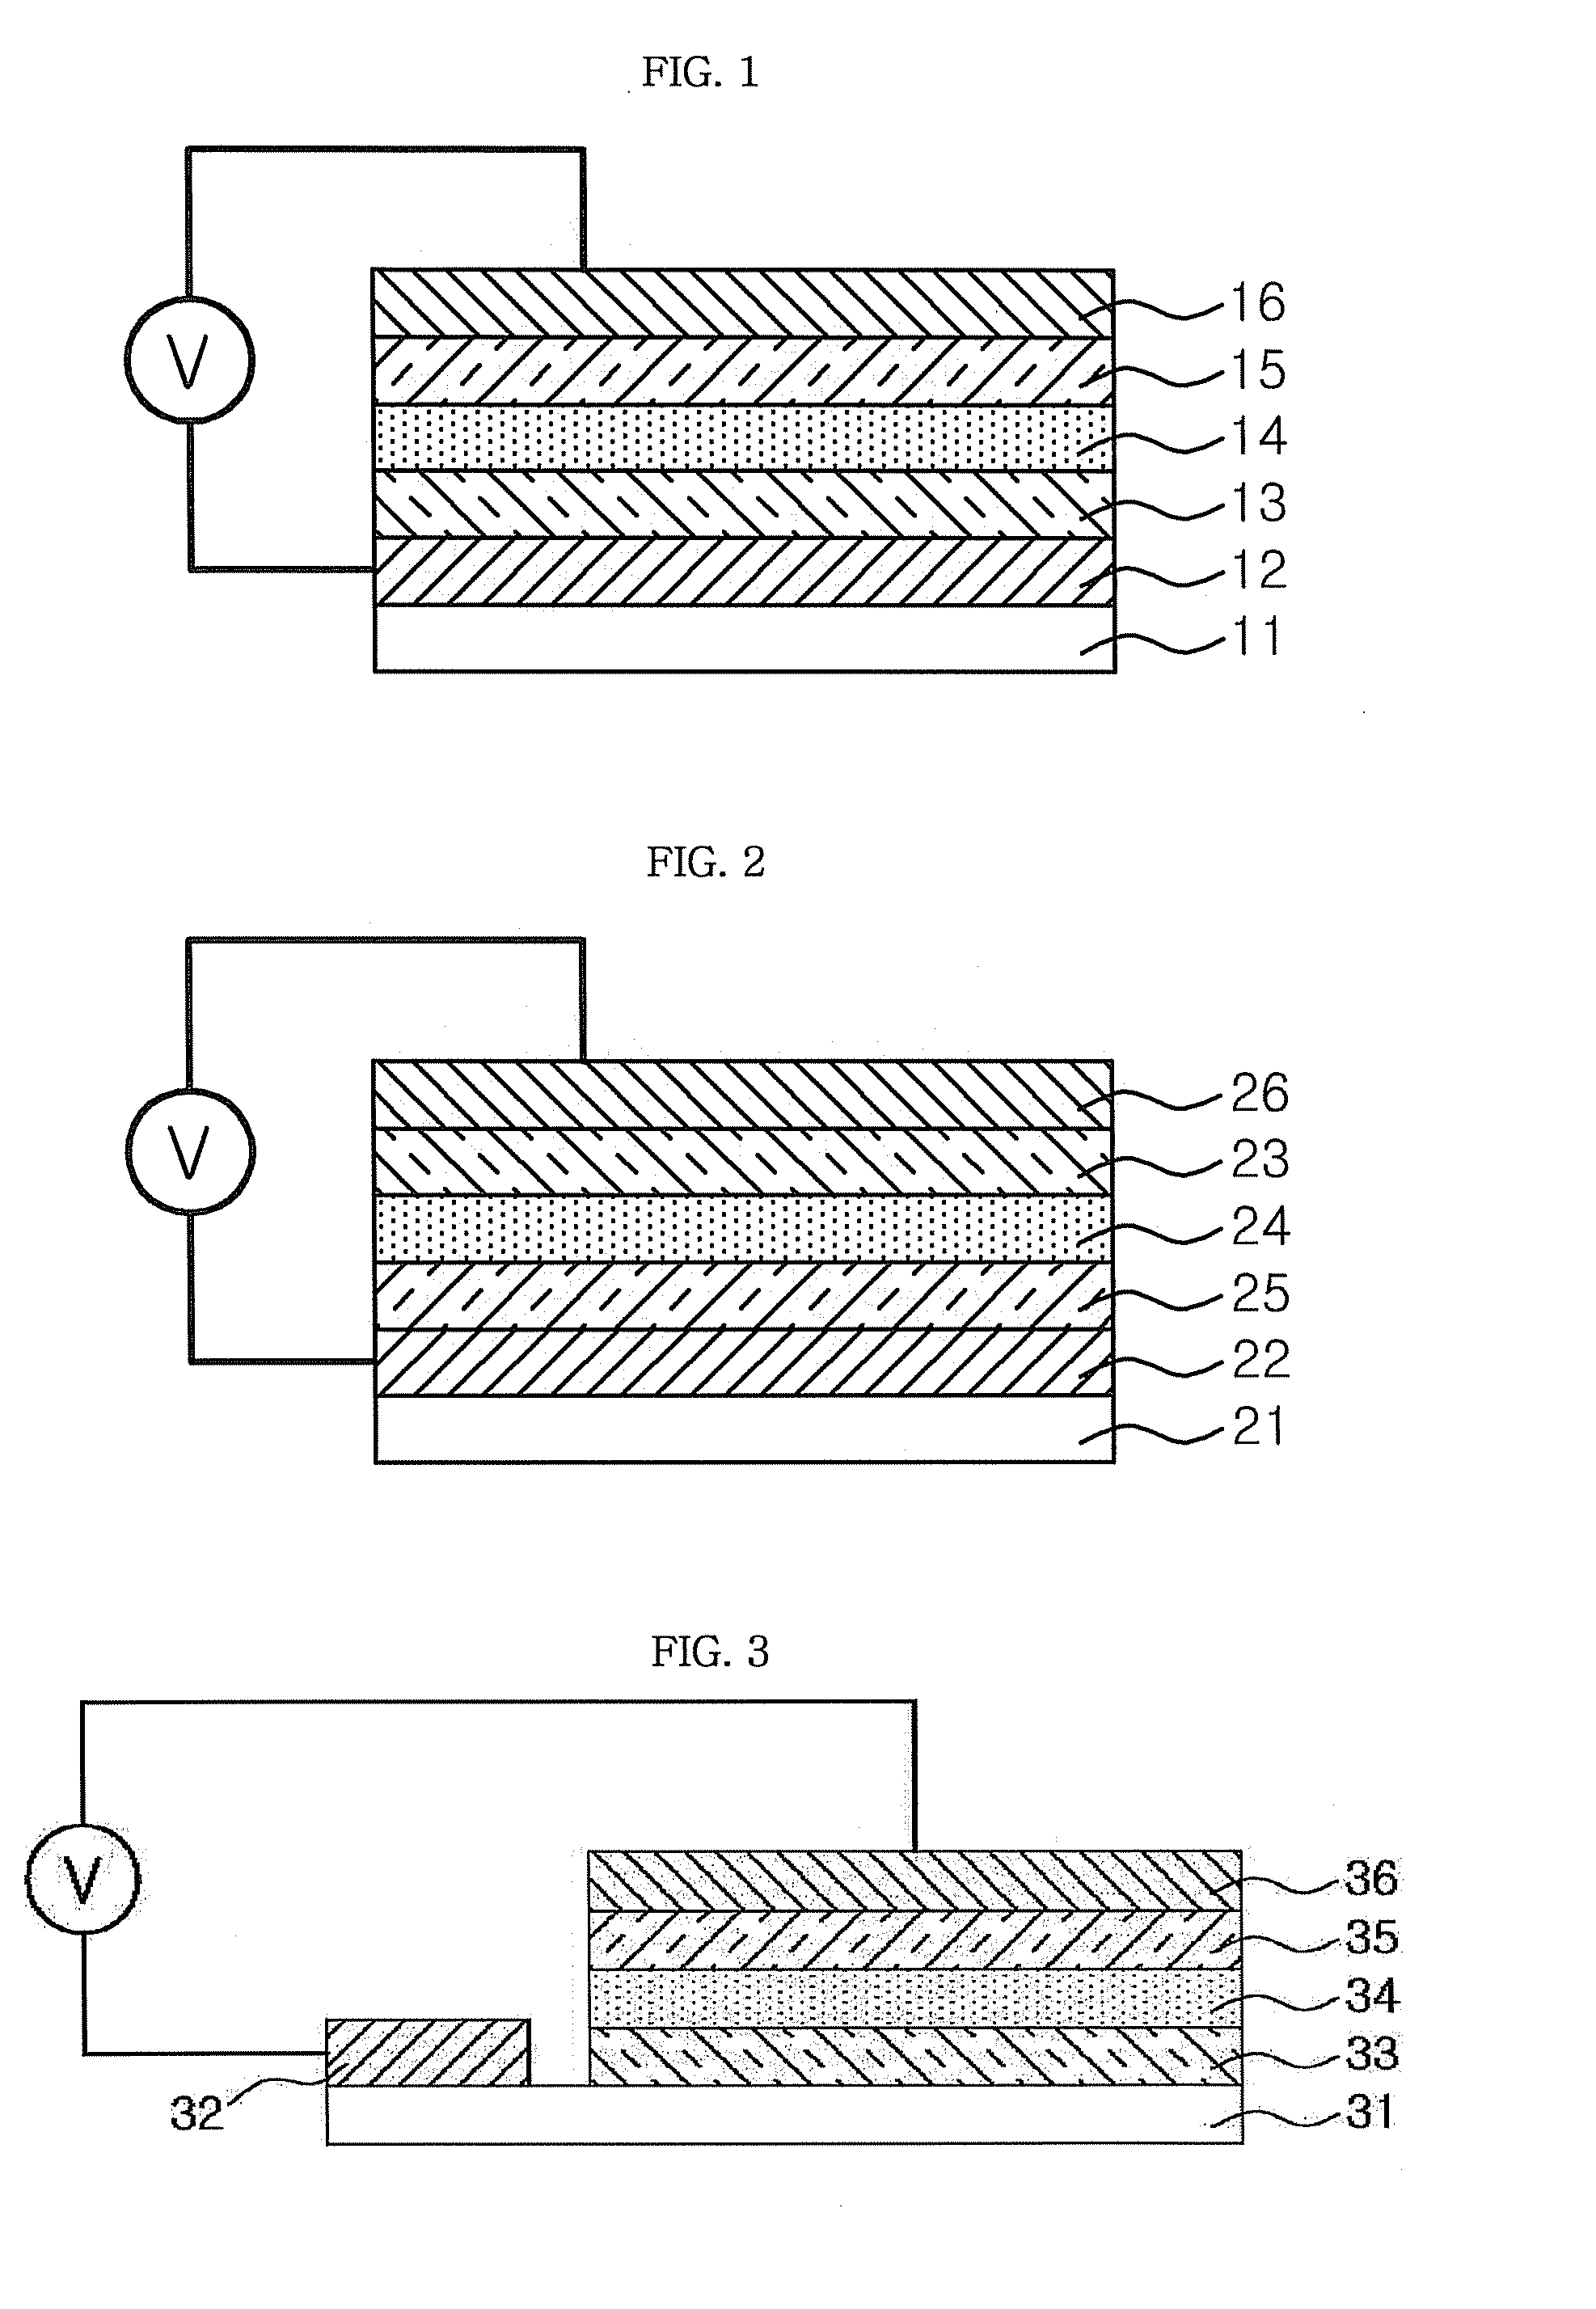 Inorganic electroluminescent diode and method of fabricating the same